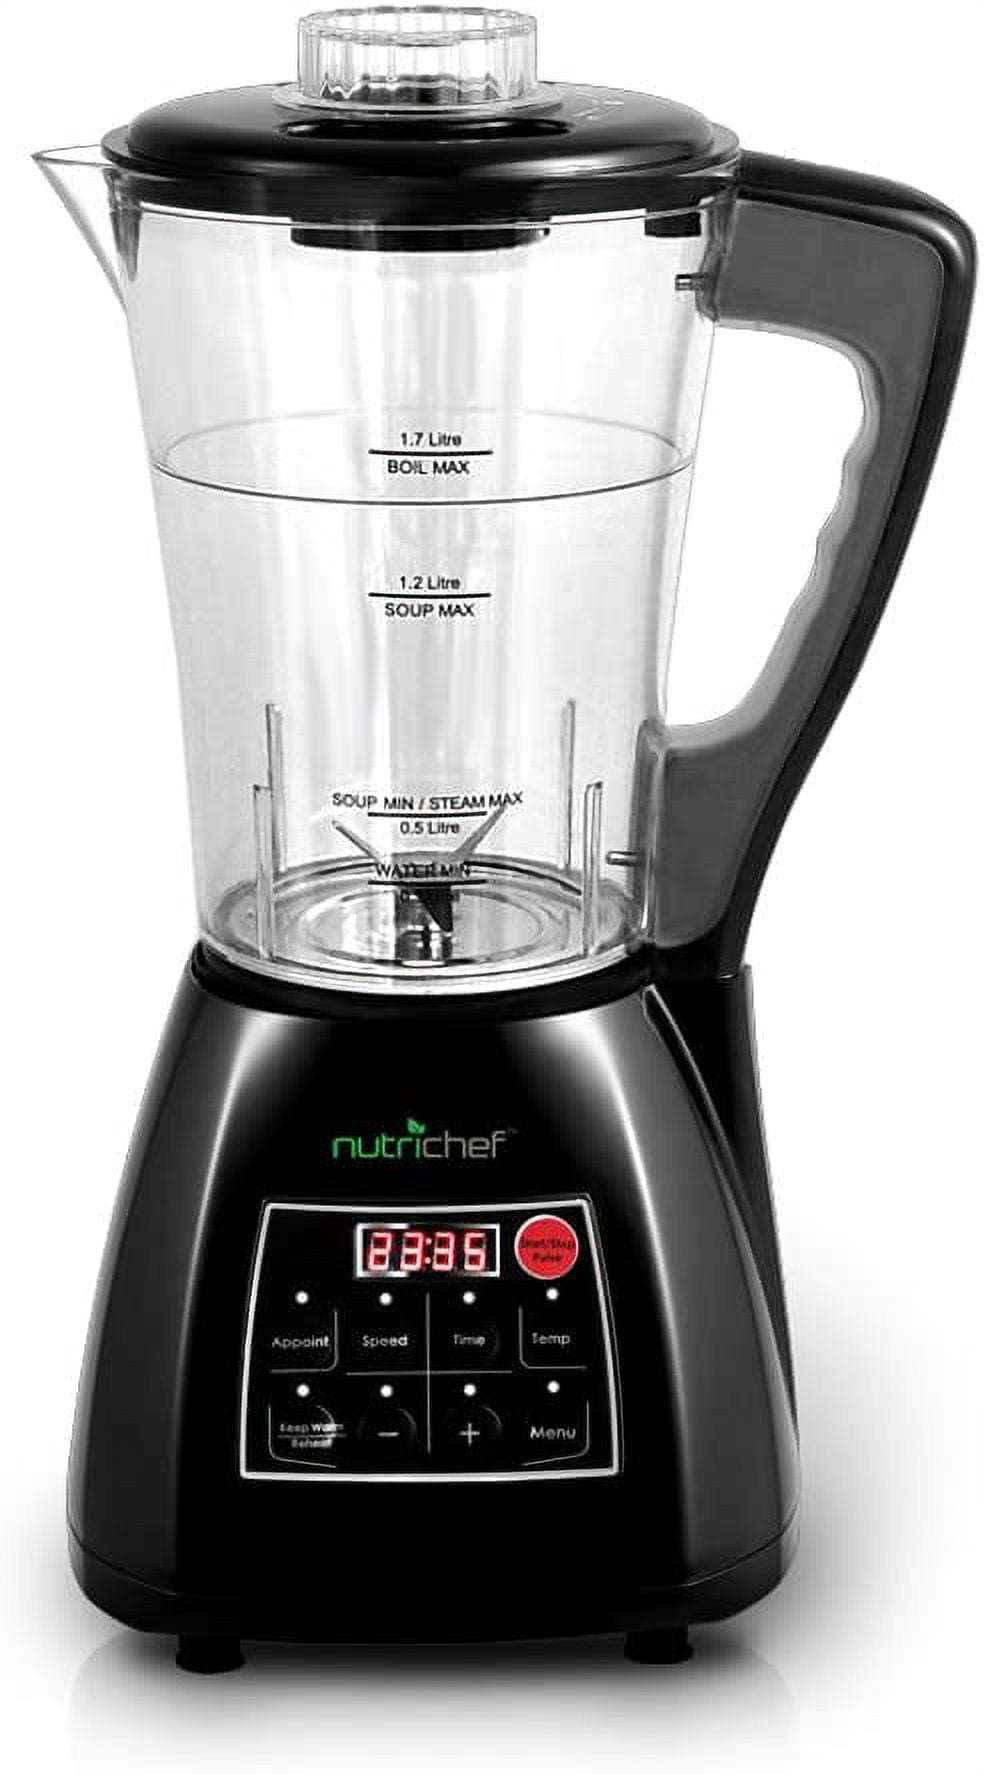 Cuisinart Hot And Cold Blender